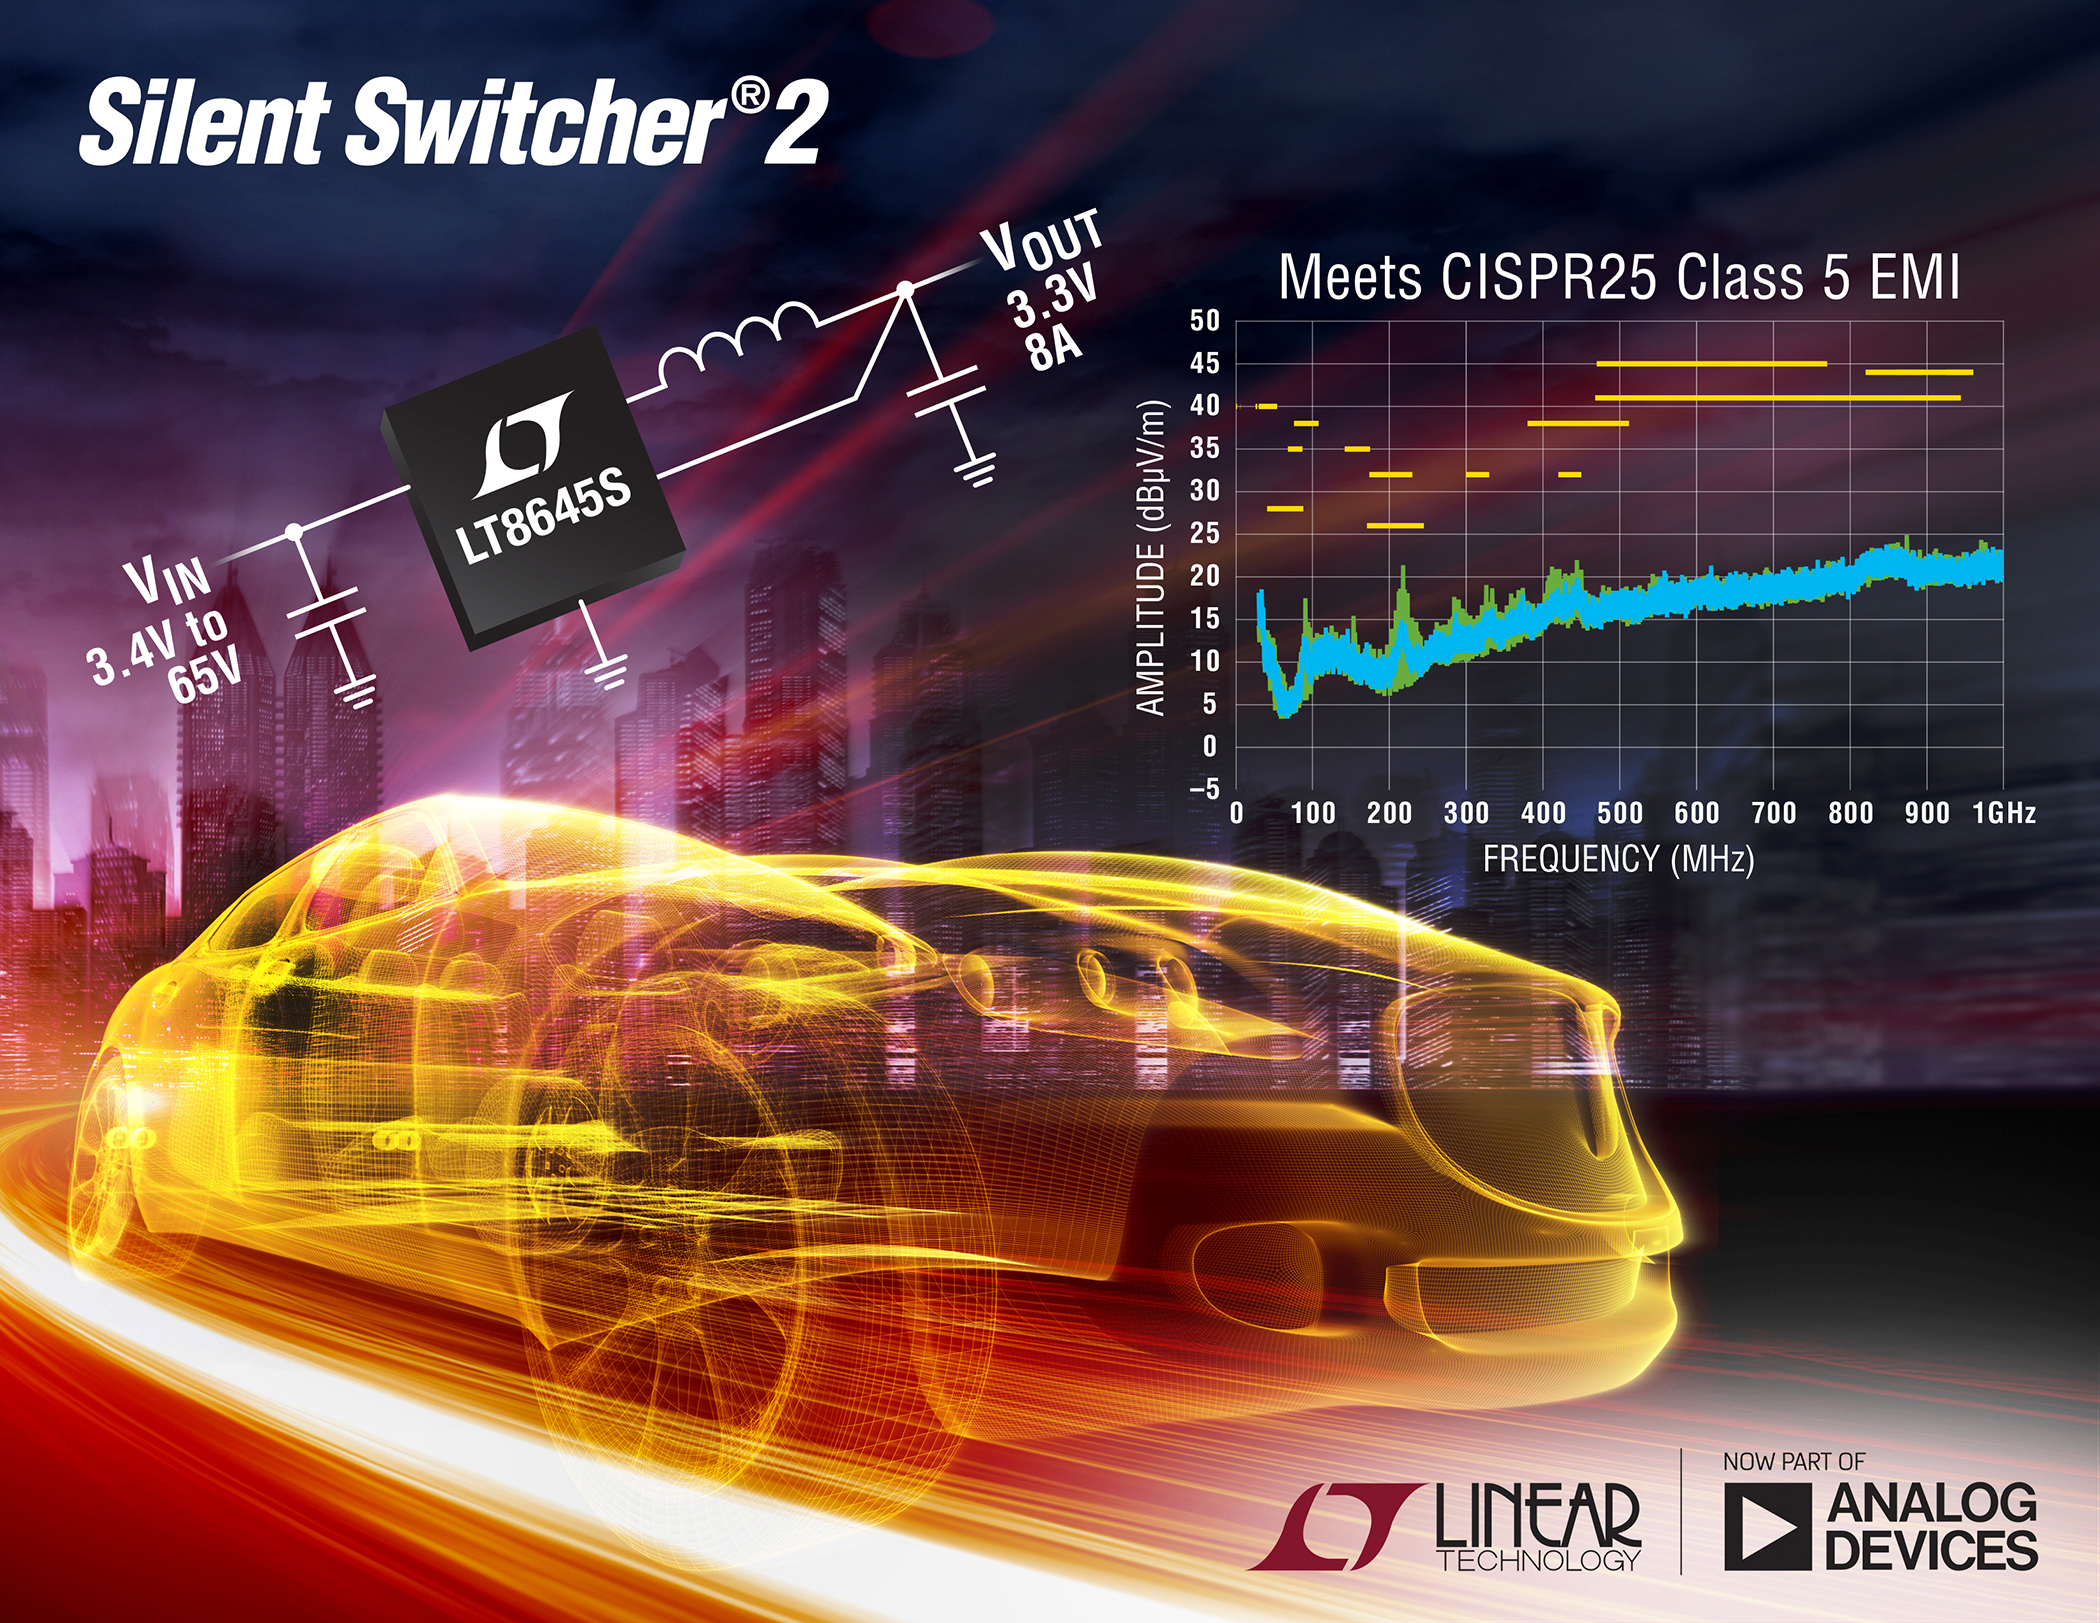 65V, 8A (IOUT), Synchronous Step-Down Silent Switcher 2 Delivers 94% Efficiency at 2MHz & Ultralow EMI/EMC Emissions